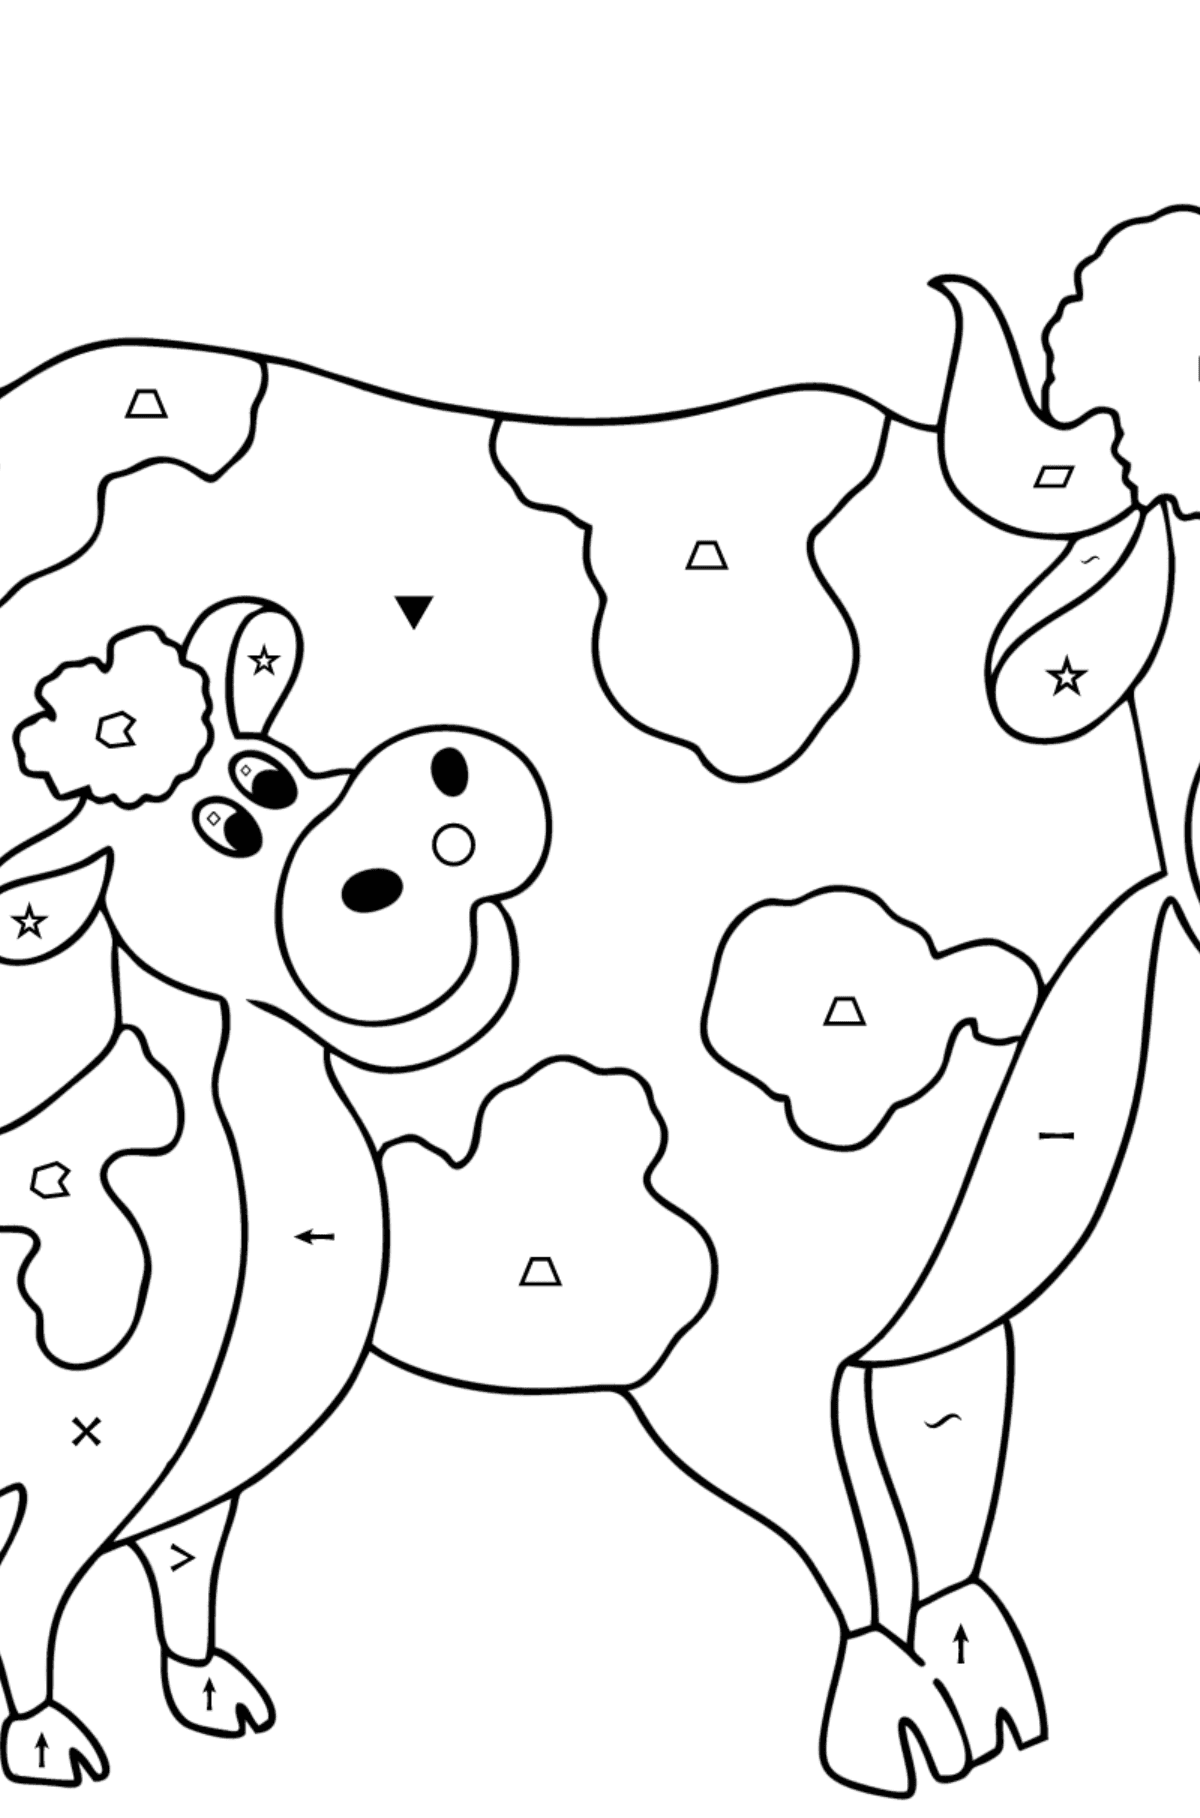 Cow and calf coloring pages - Coloring by Symbols and Geometric Shapes for Kids